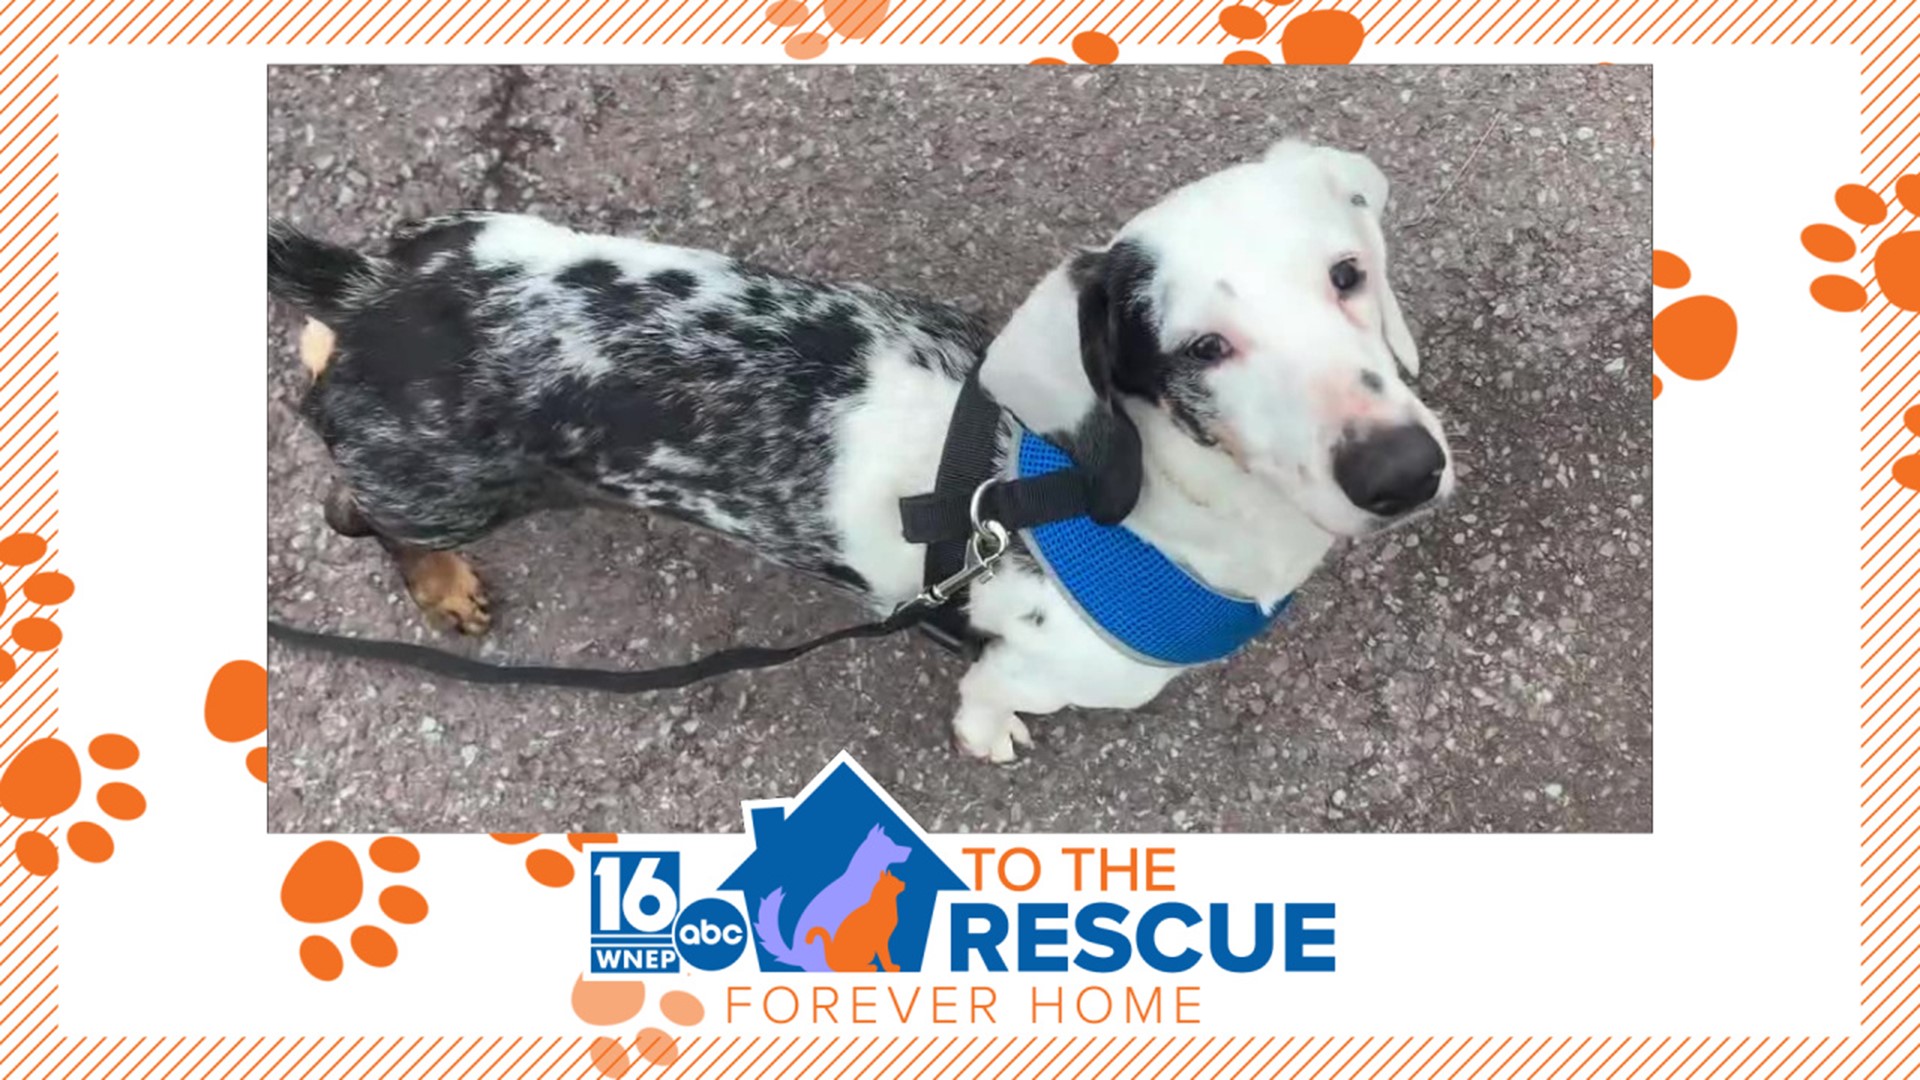 We've all heard that good things come in small packages. In this week's 16 To the Rescue, we meet Snoopy, a tiny pup with a big personality.